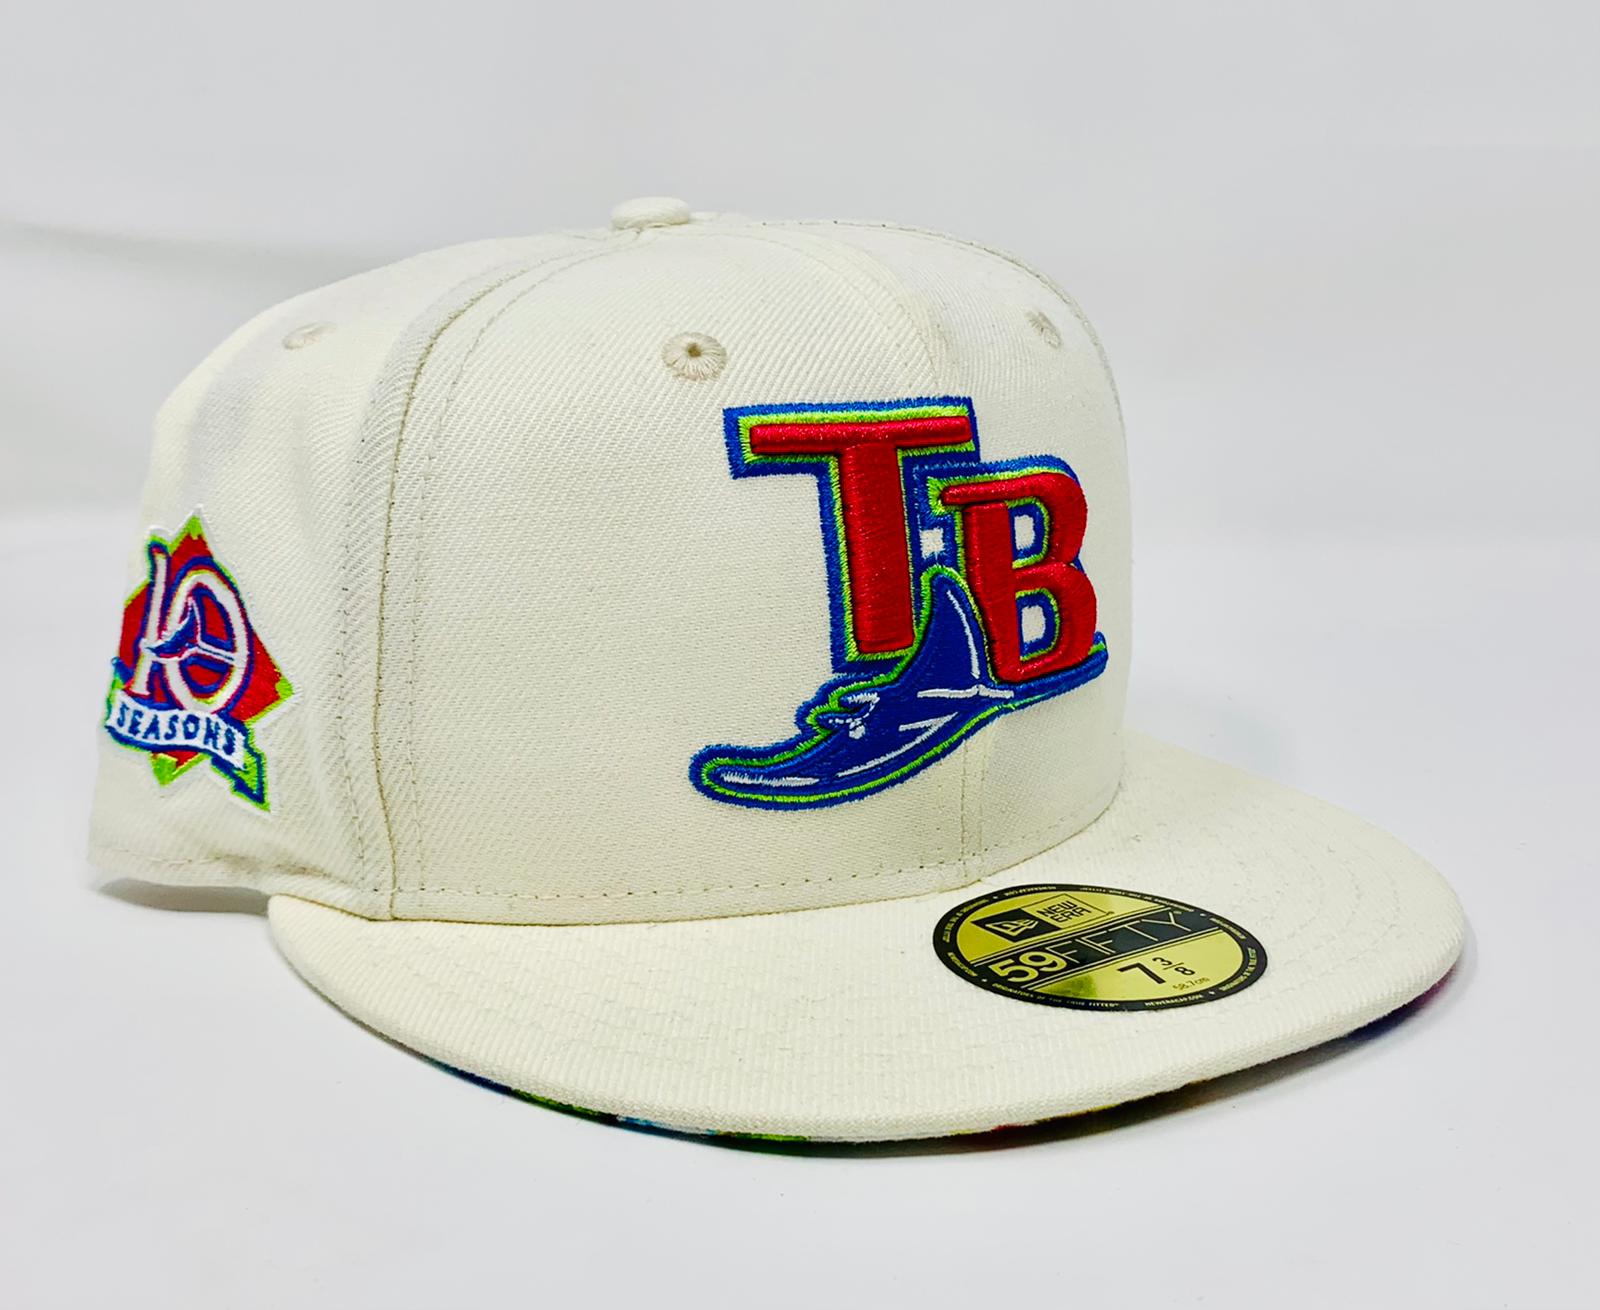 New Era Tampa Bay Rays Great Outdoors 10th Anniversary Patch Hat